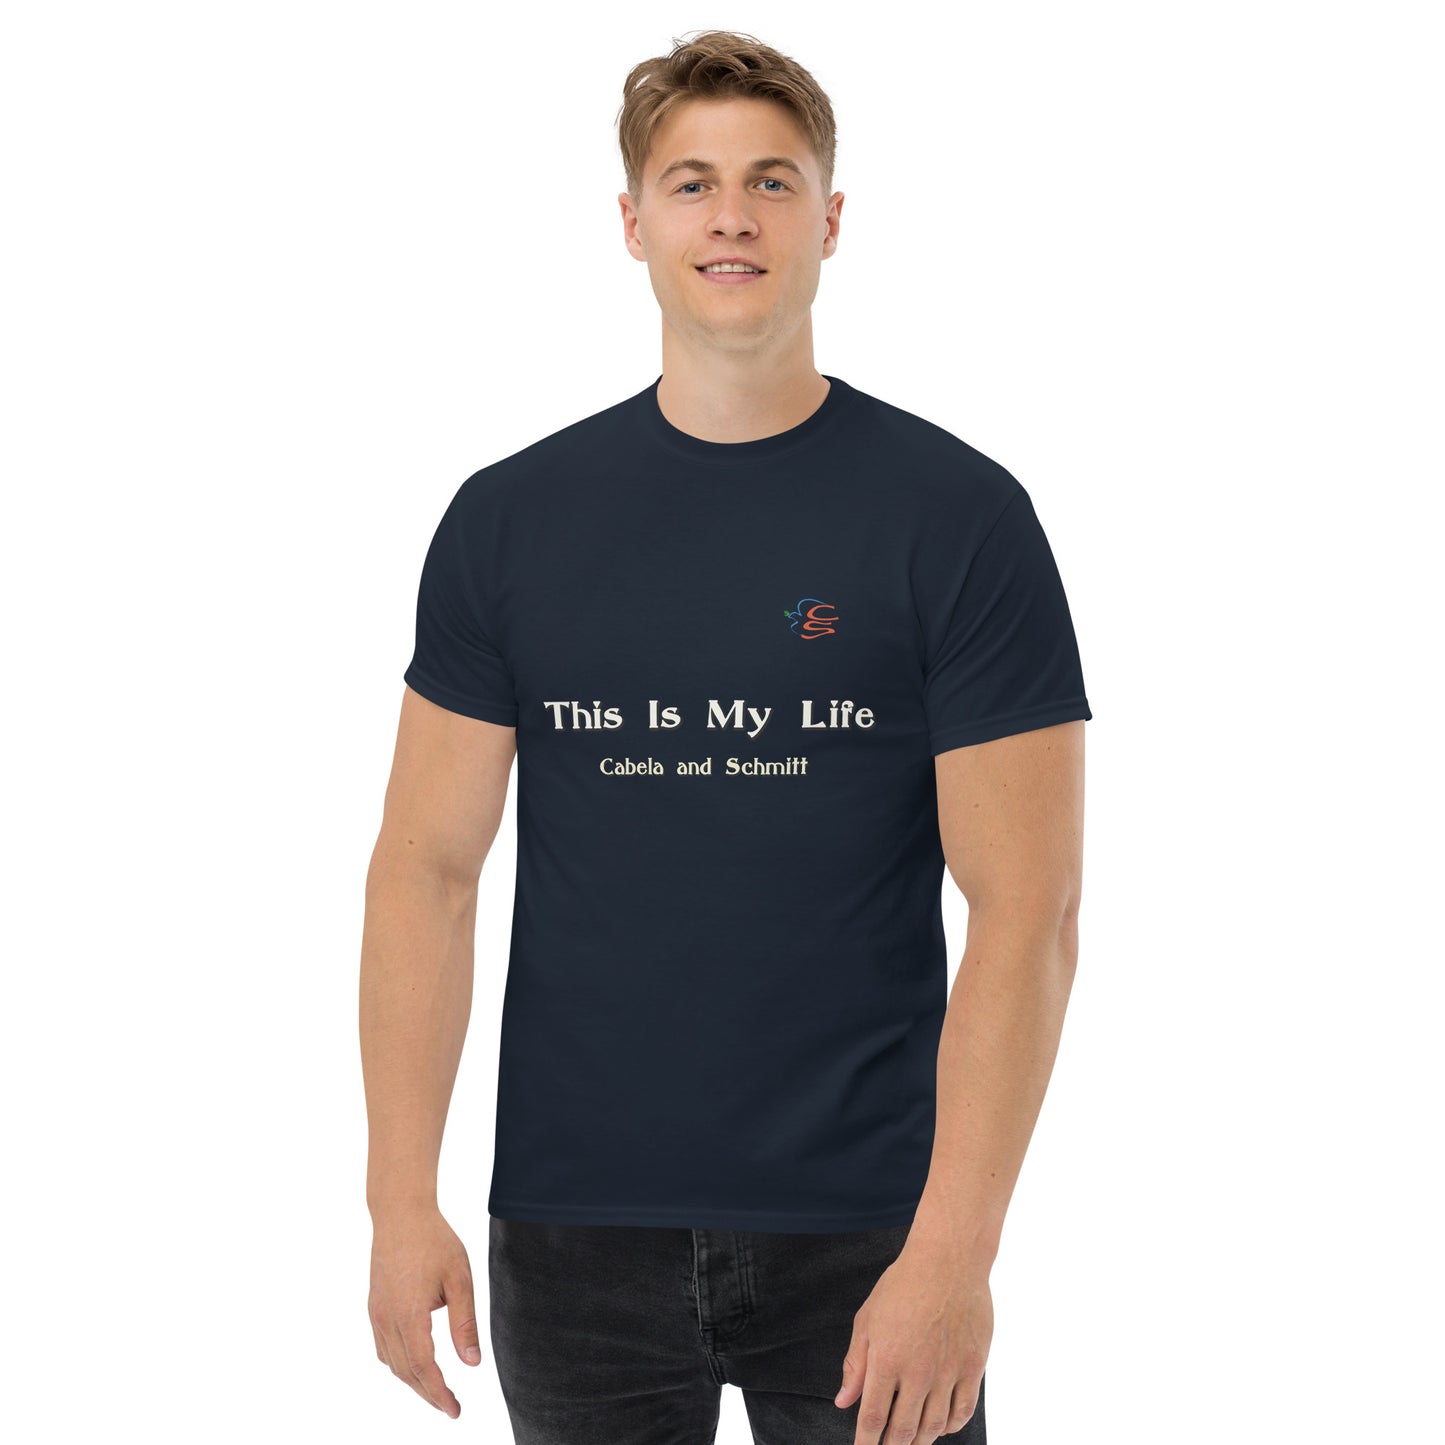 Men's classic tee "This Is My Life"